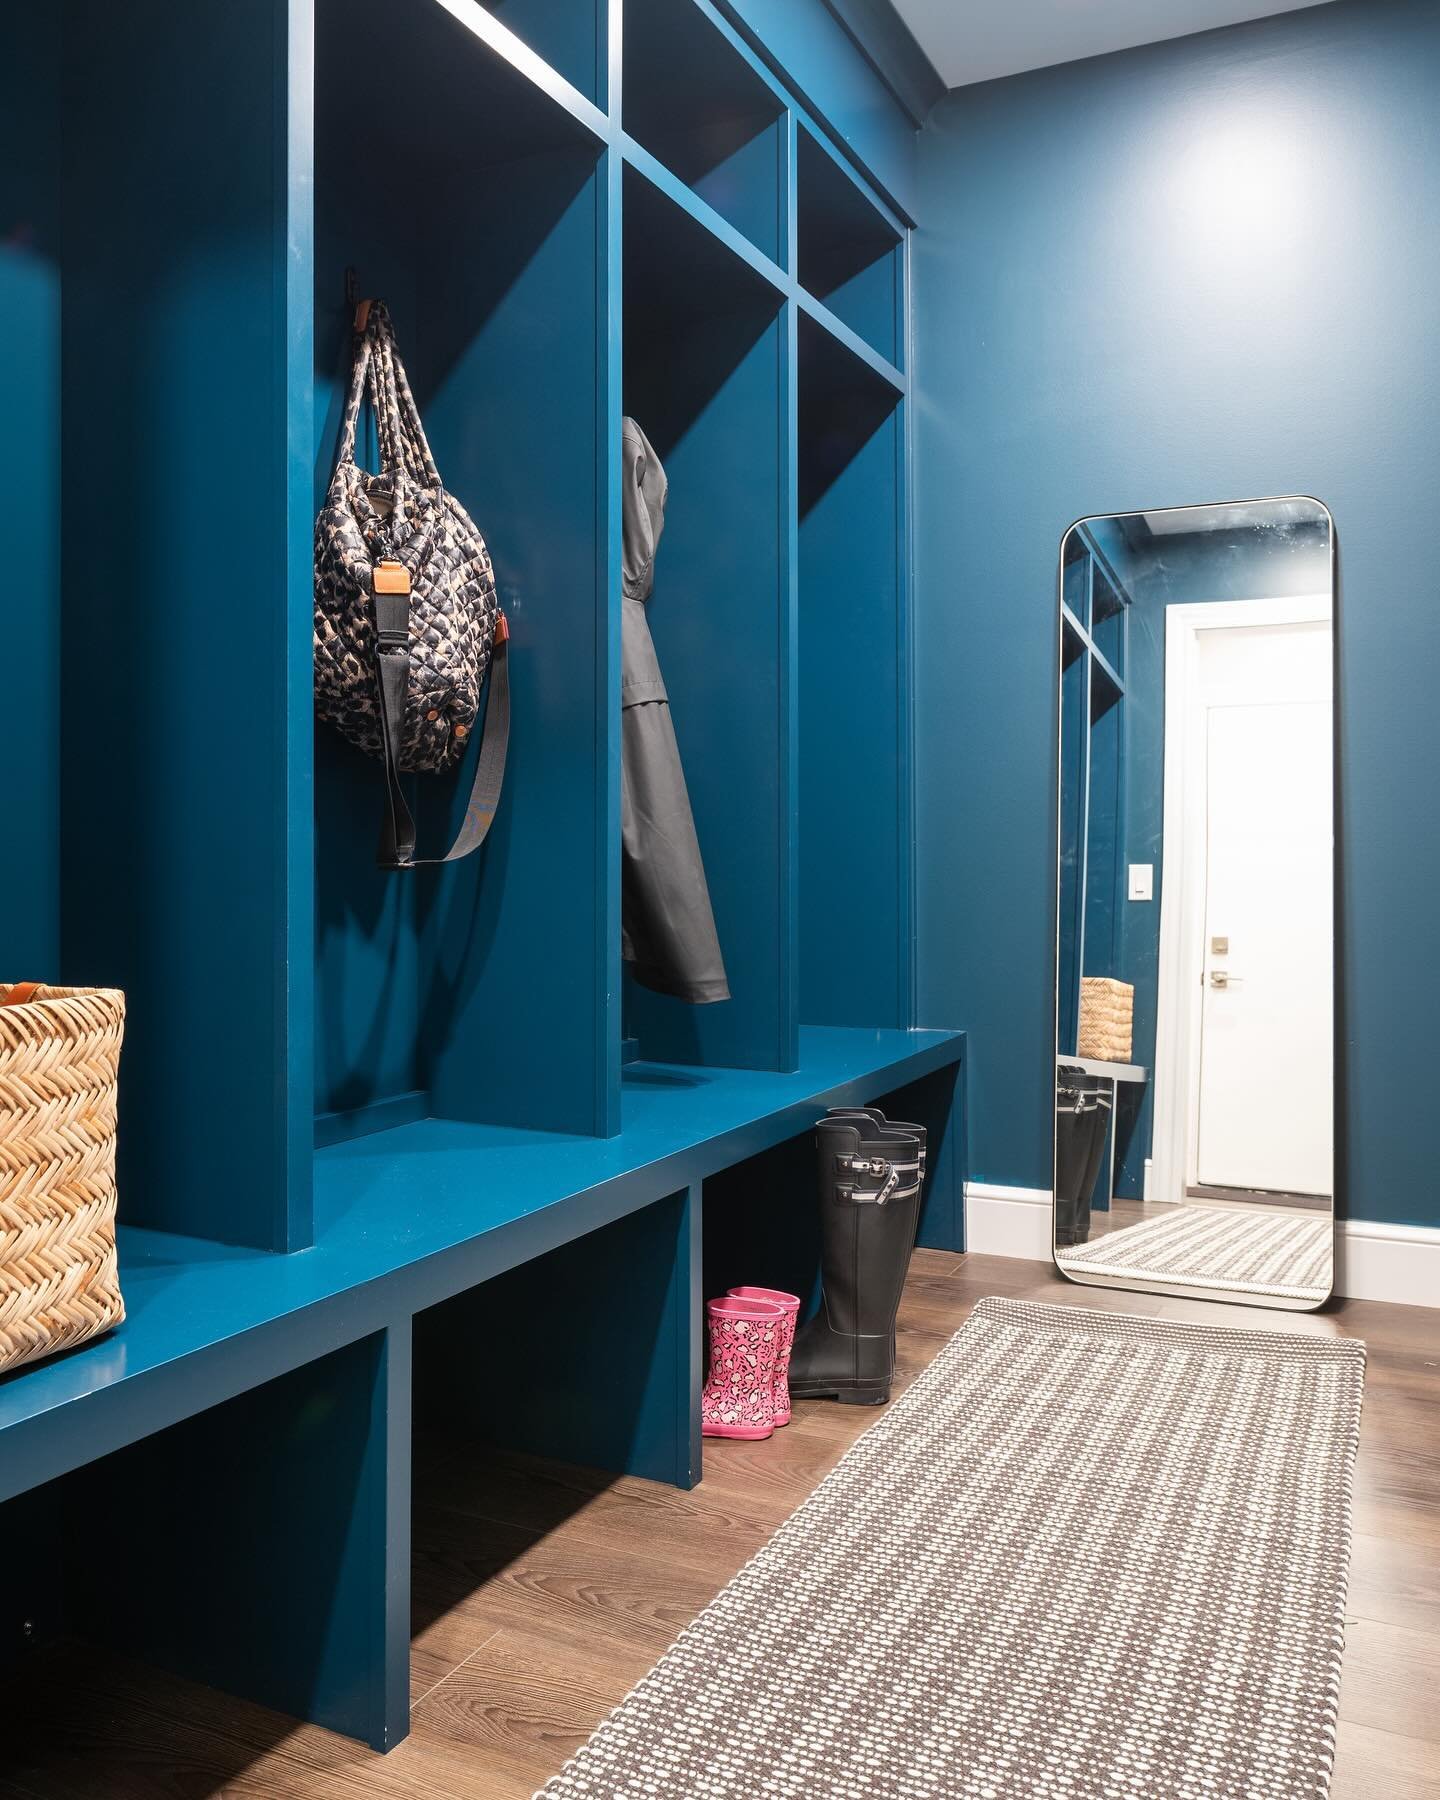 Spring weather calls for mudroom makeovers! 

From practicality to personality, we&rsquo;ve got you covered. We&rsquo;re all about bringing a little sunshine indoors! 

📸: @tonyhughesphoto 

#SpringRefresh #MudroomMakeover #BringingTheOutdoorsIn #Te